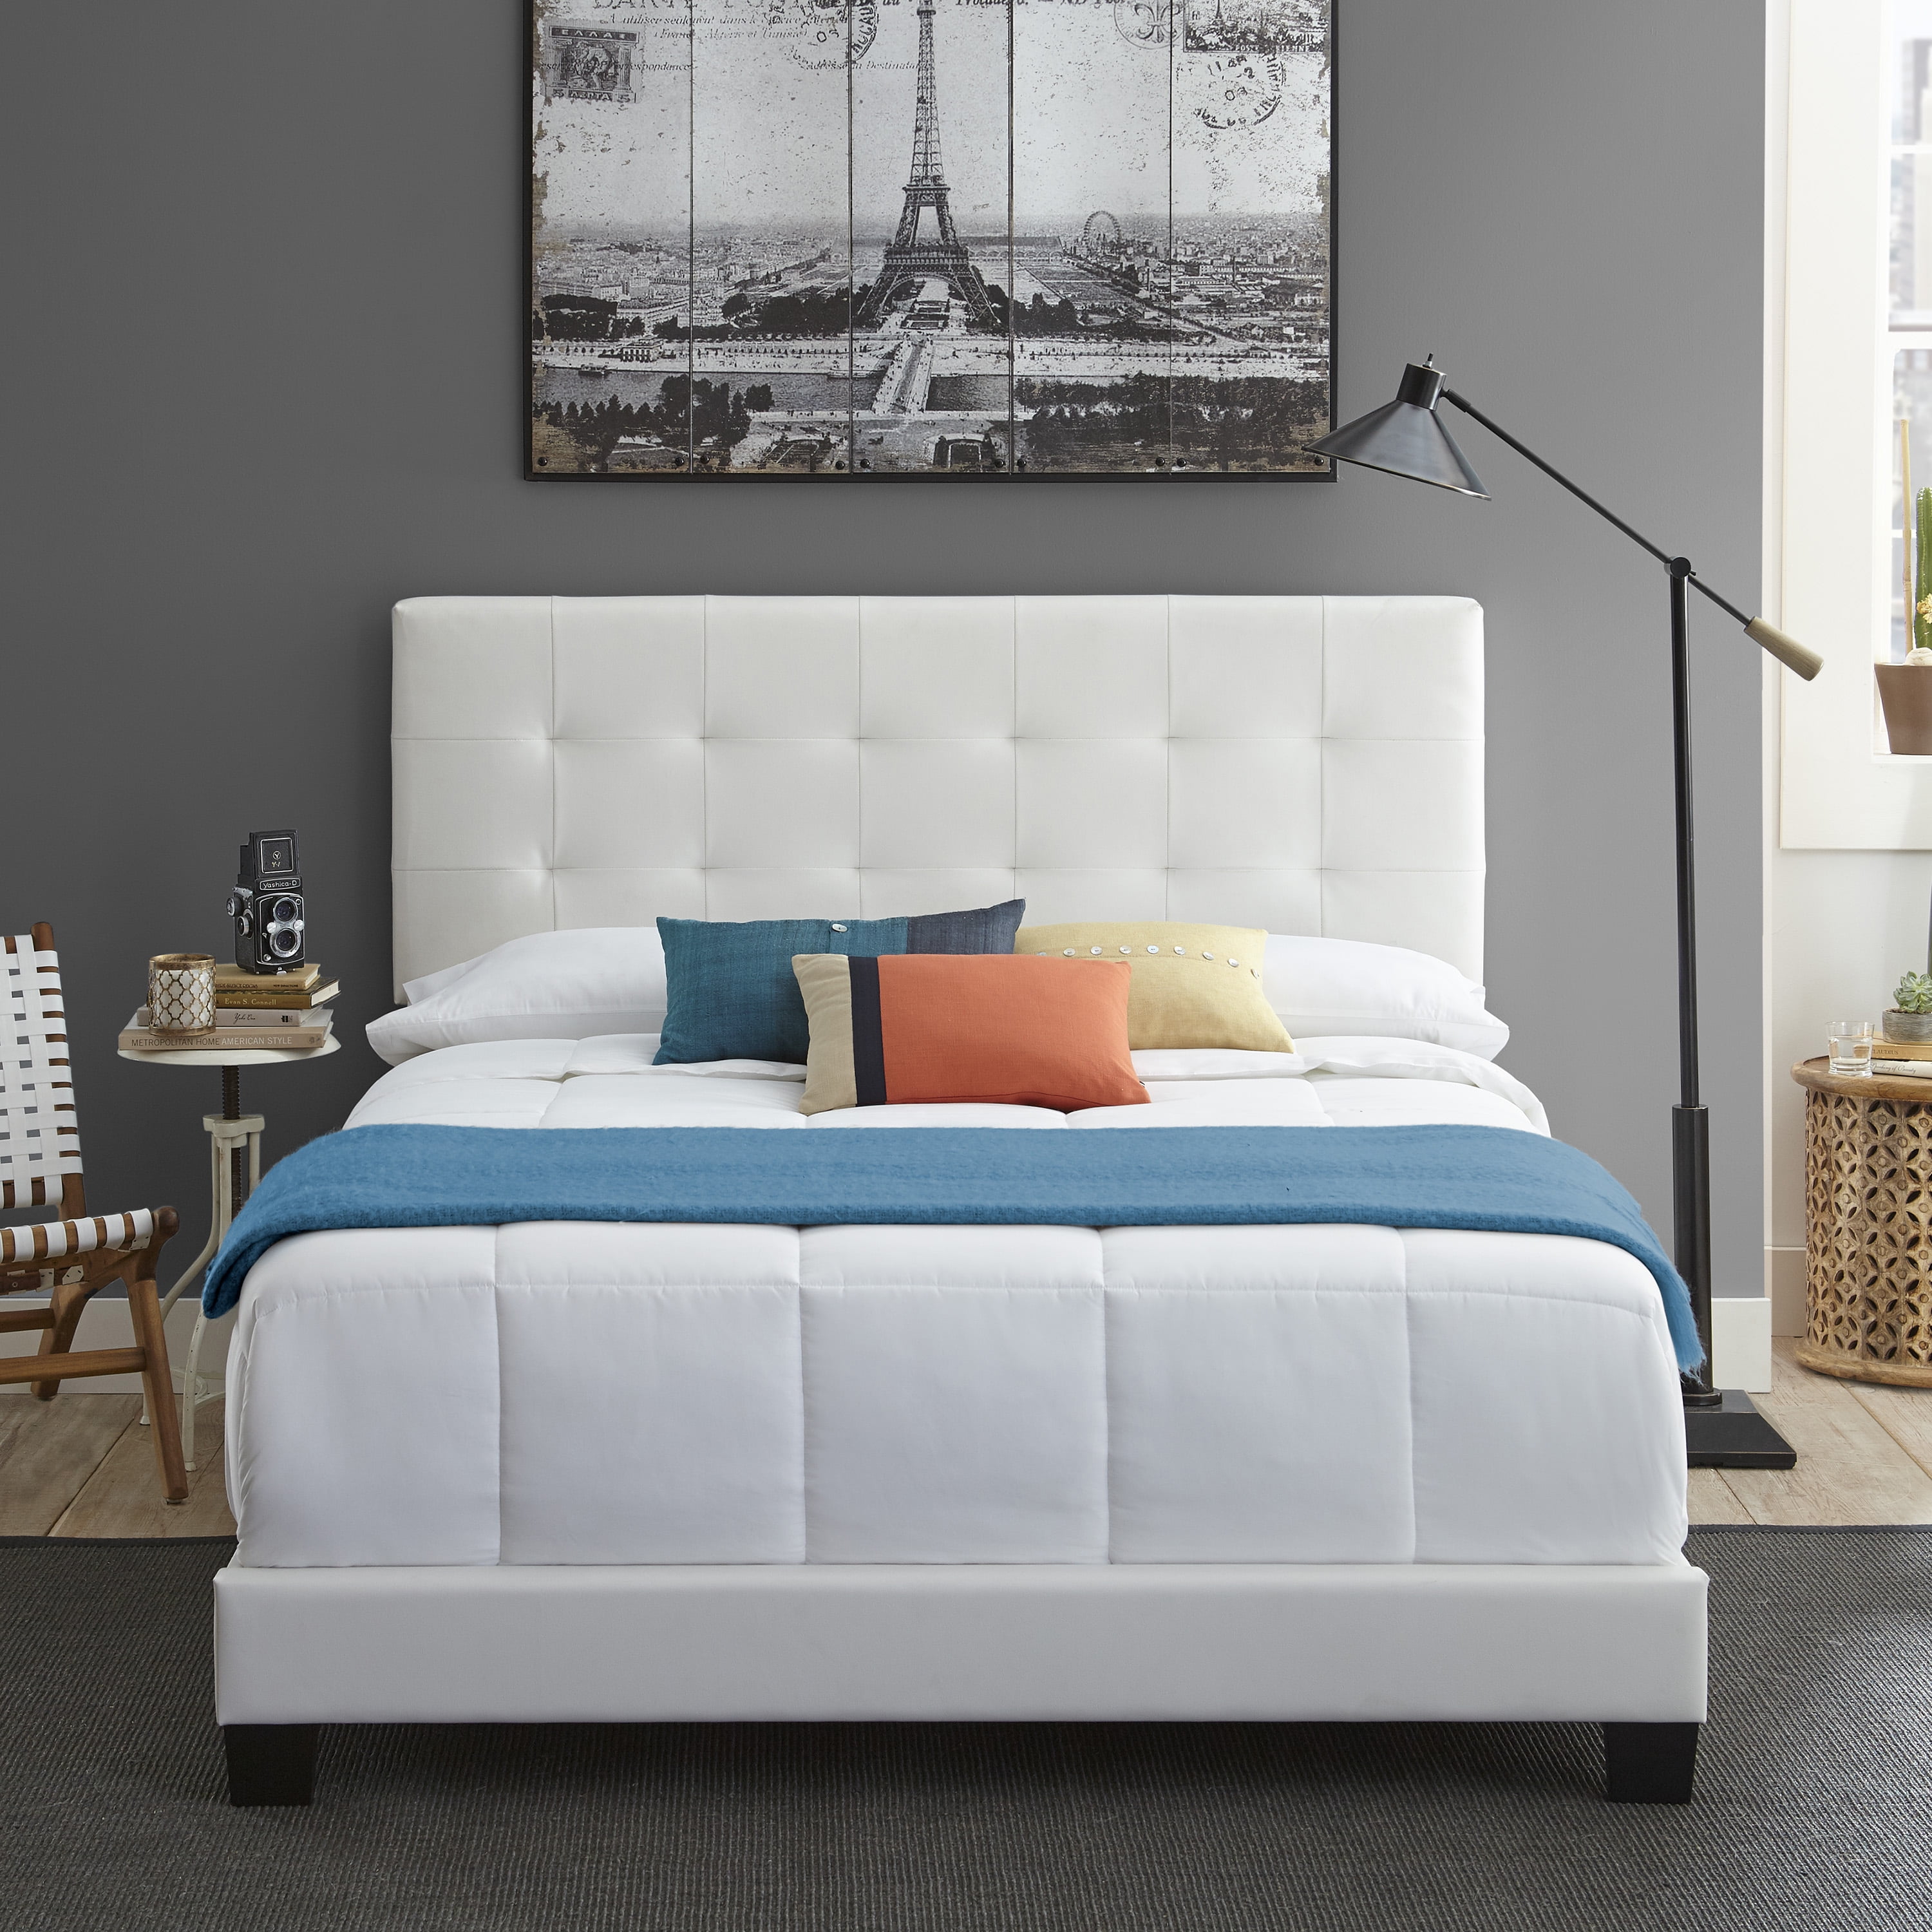 Buy Premier Zurich II Upholstered Tufted Faux Leather Platform Bed with